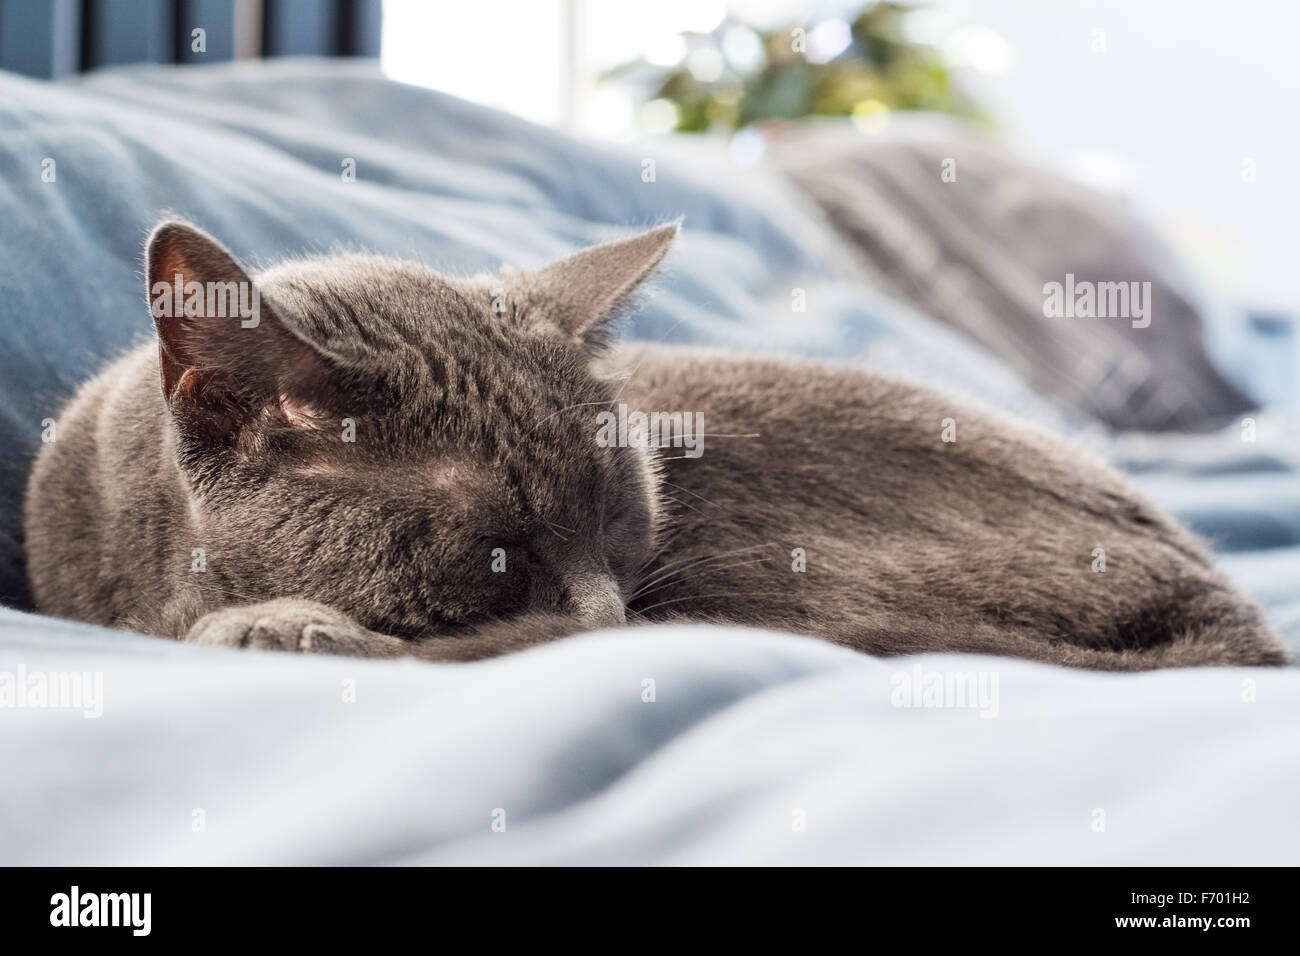 A grey cat napping on a bed Stock Photo